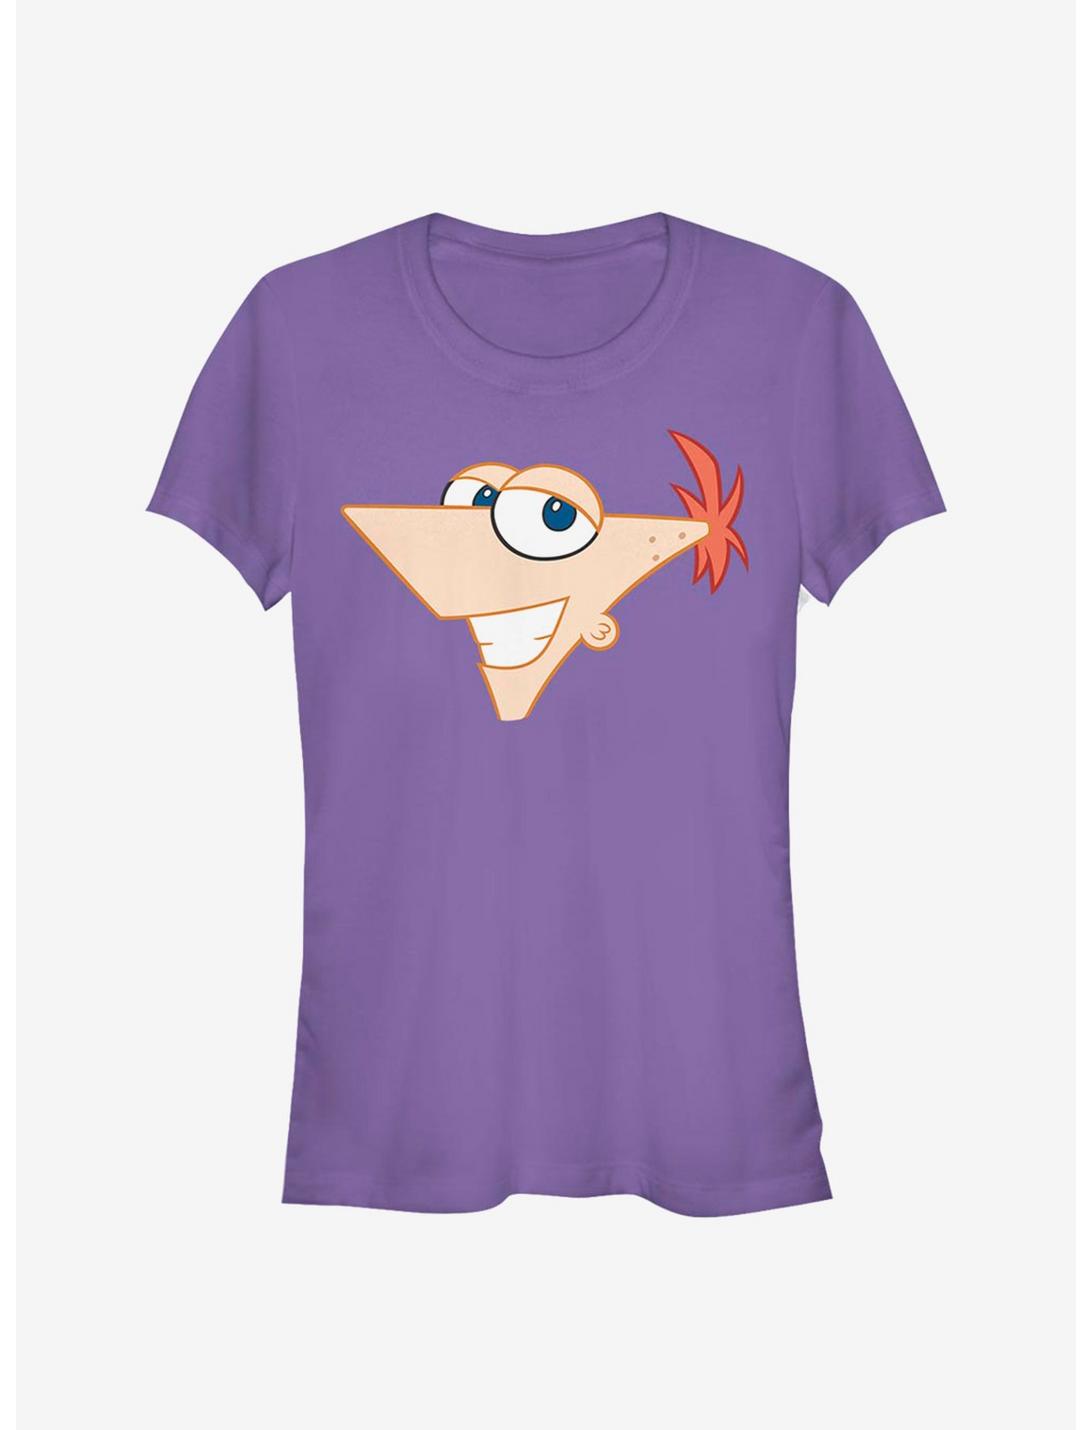 Disney Phineas And Ferb Large Phineas Girls T-Shirt, PURPLE, hi-res